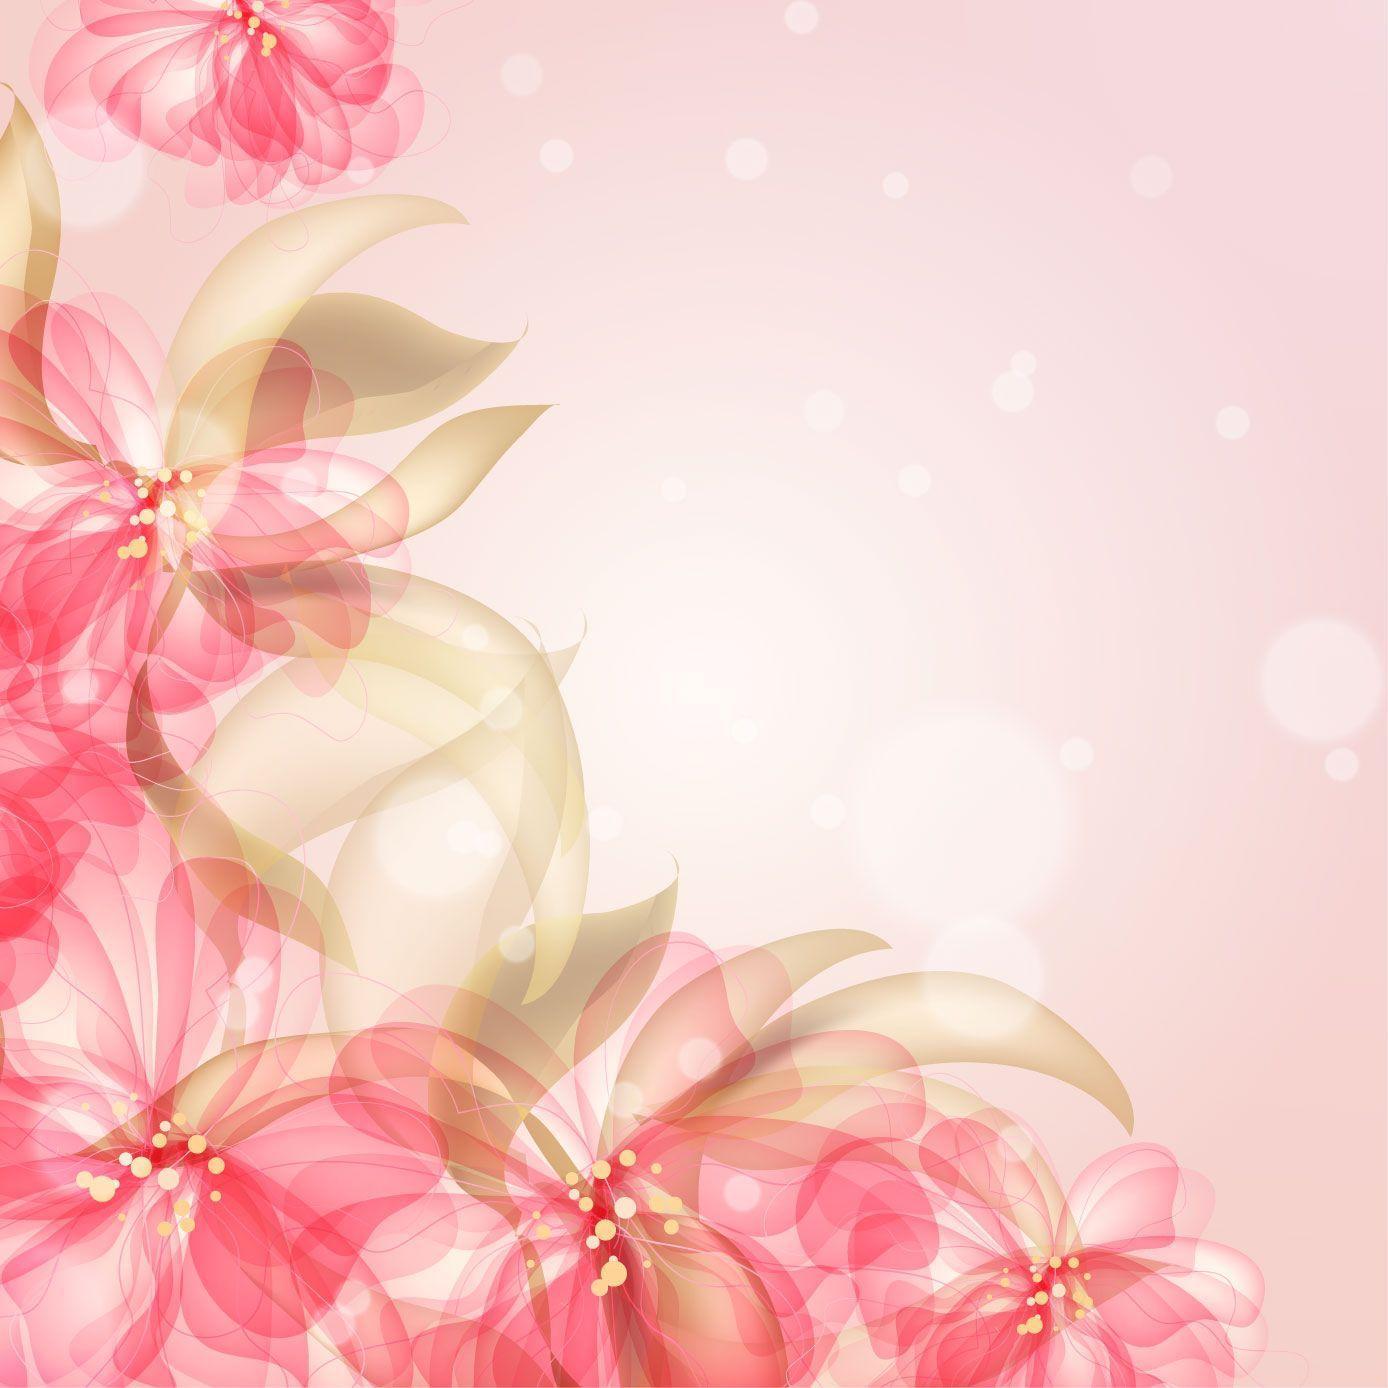 Colorful flowers background 03 vector Free Vector / 4Vector